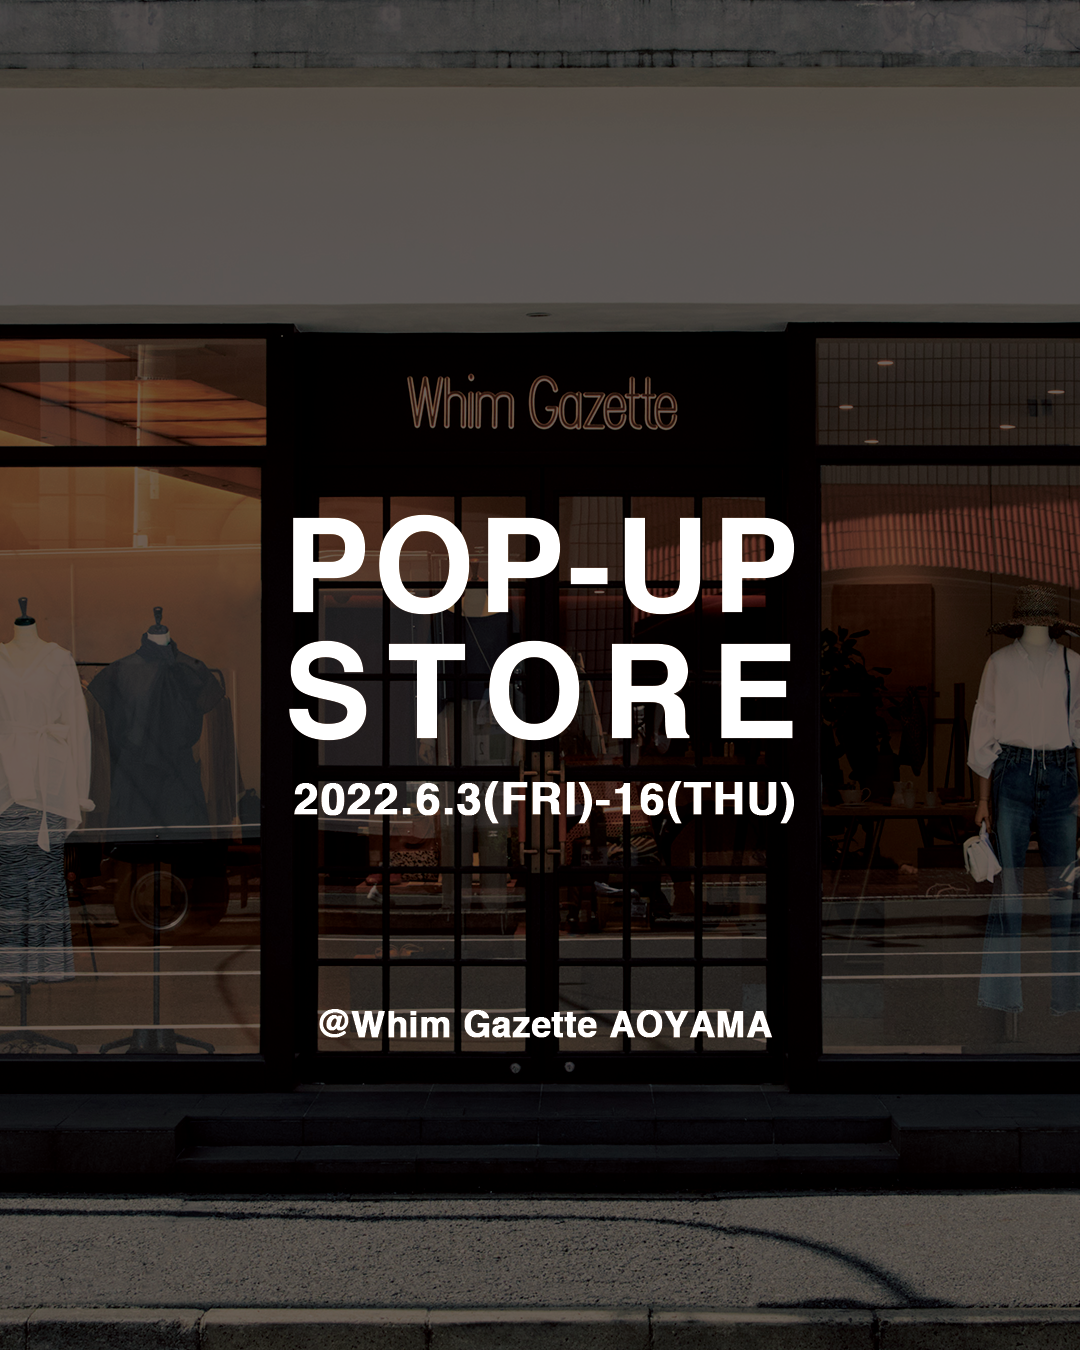 PRMAL pop-up store at Whim Gazette AOYAMA opens.